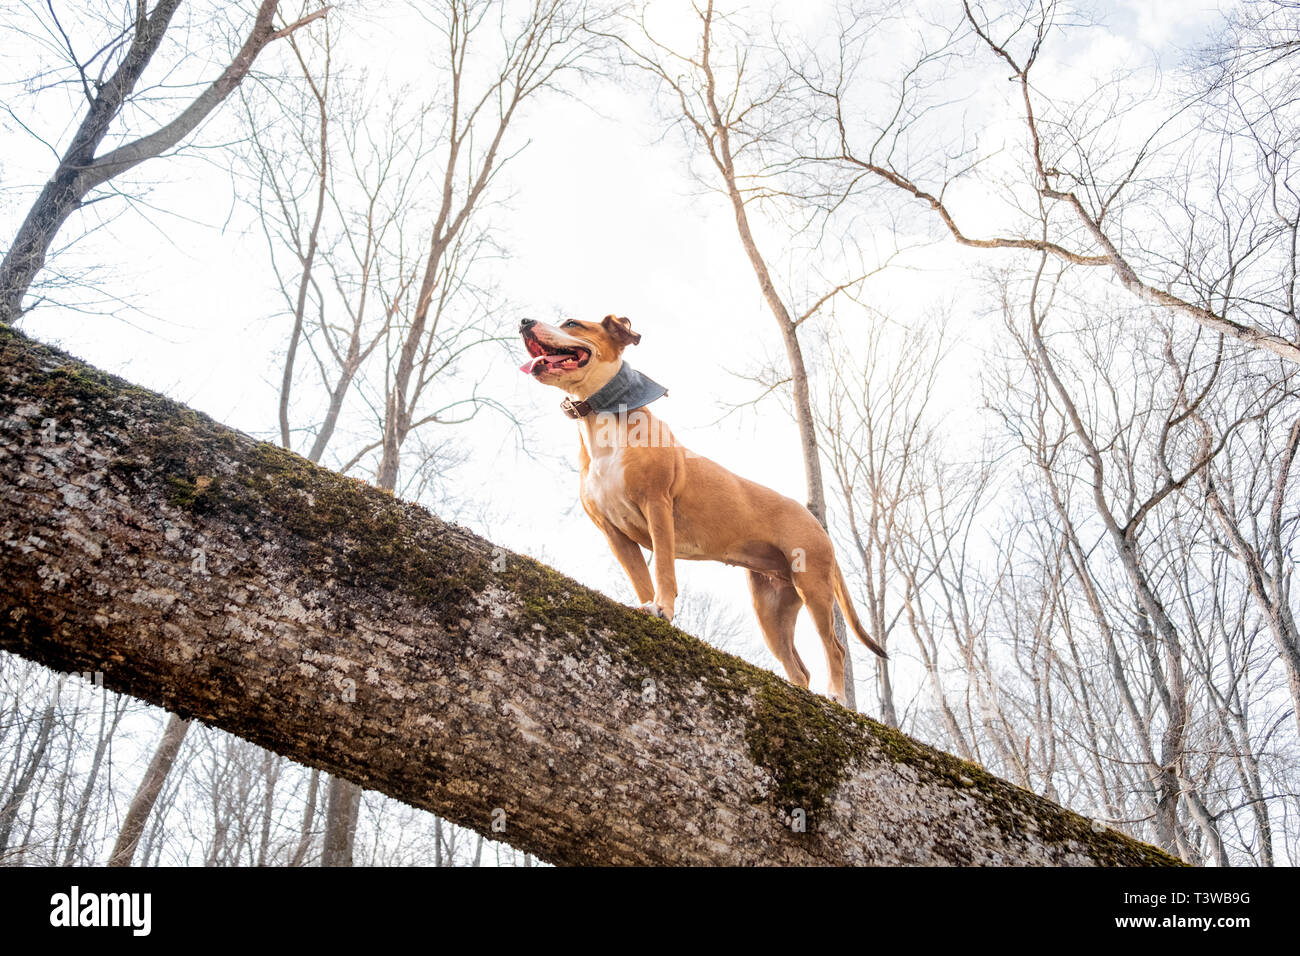 Adventure dog in the forest. Happy staffordshire terrier climbs a log in the woods and enjoys healthy active life, hero shot view Stock Photo